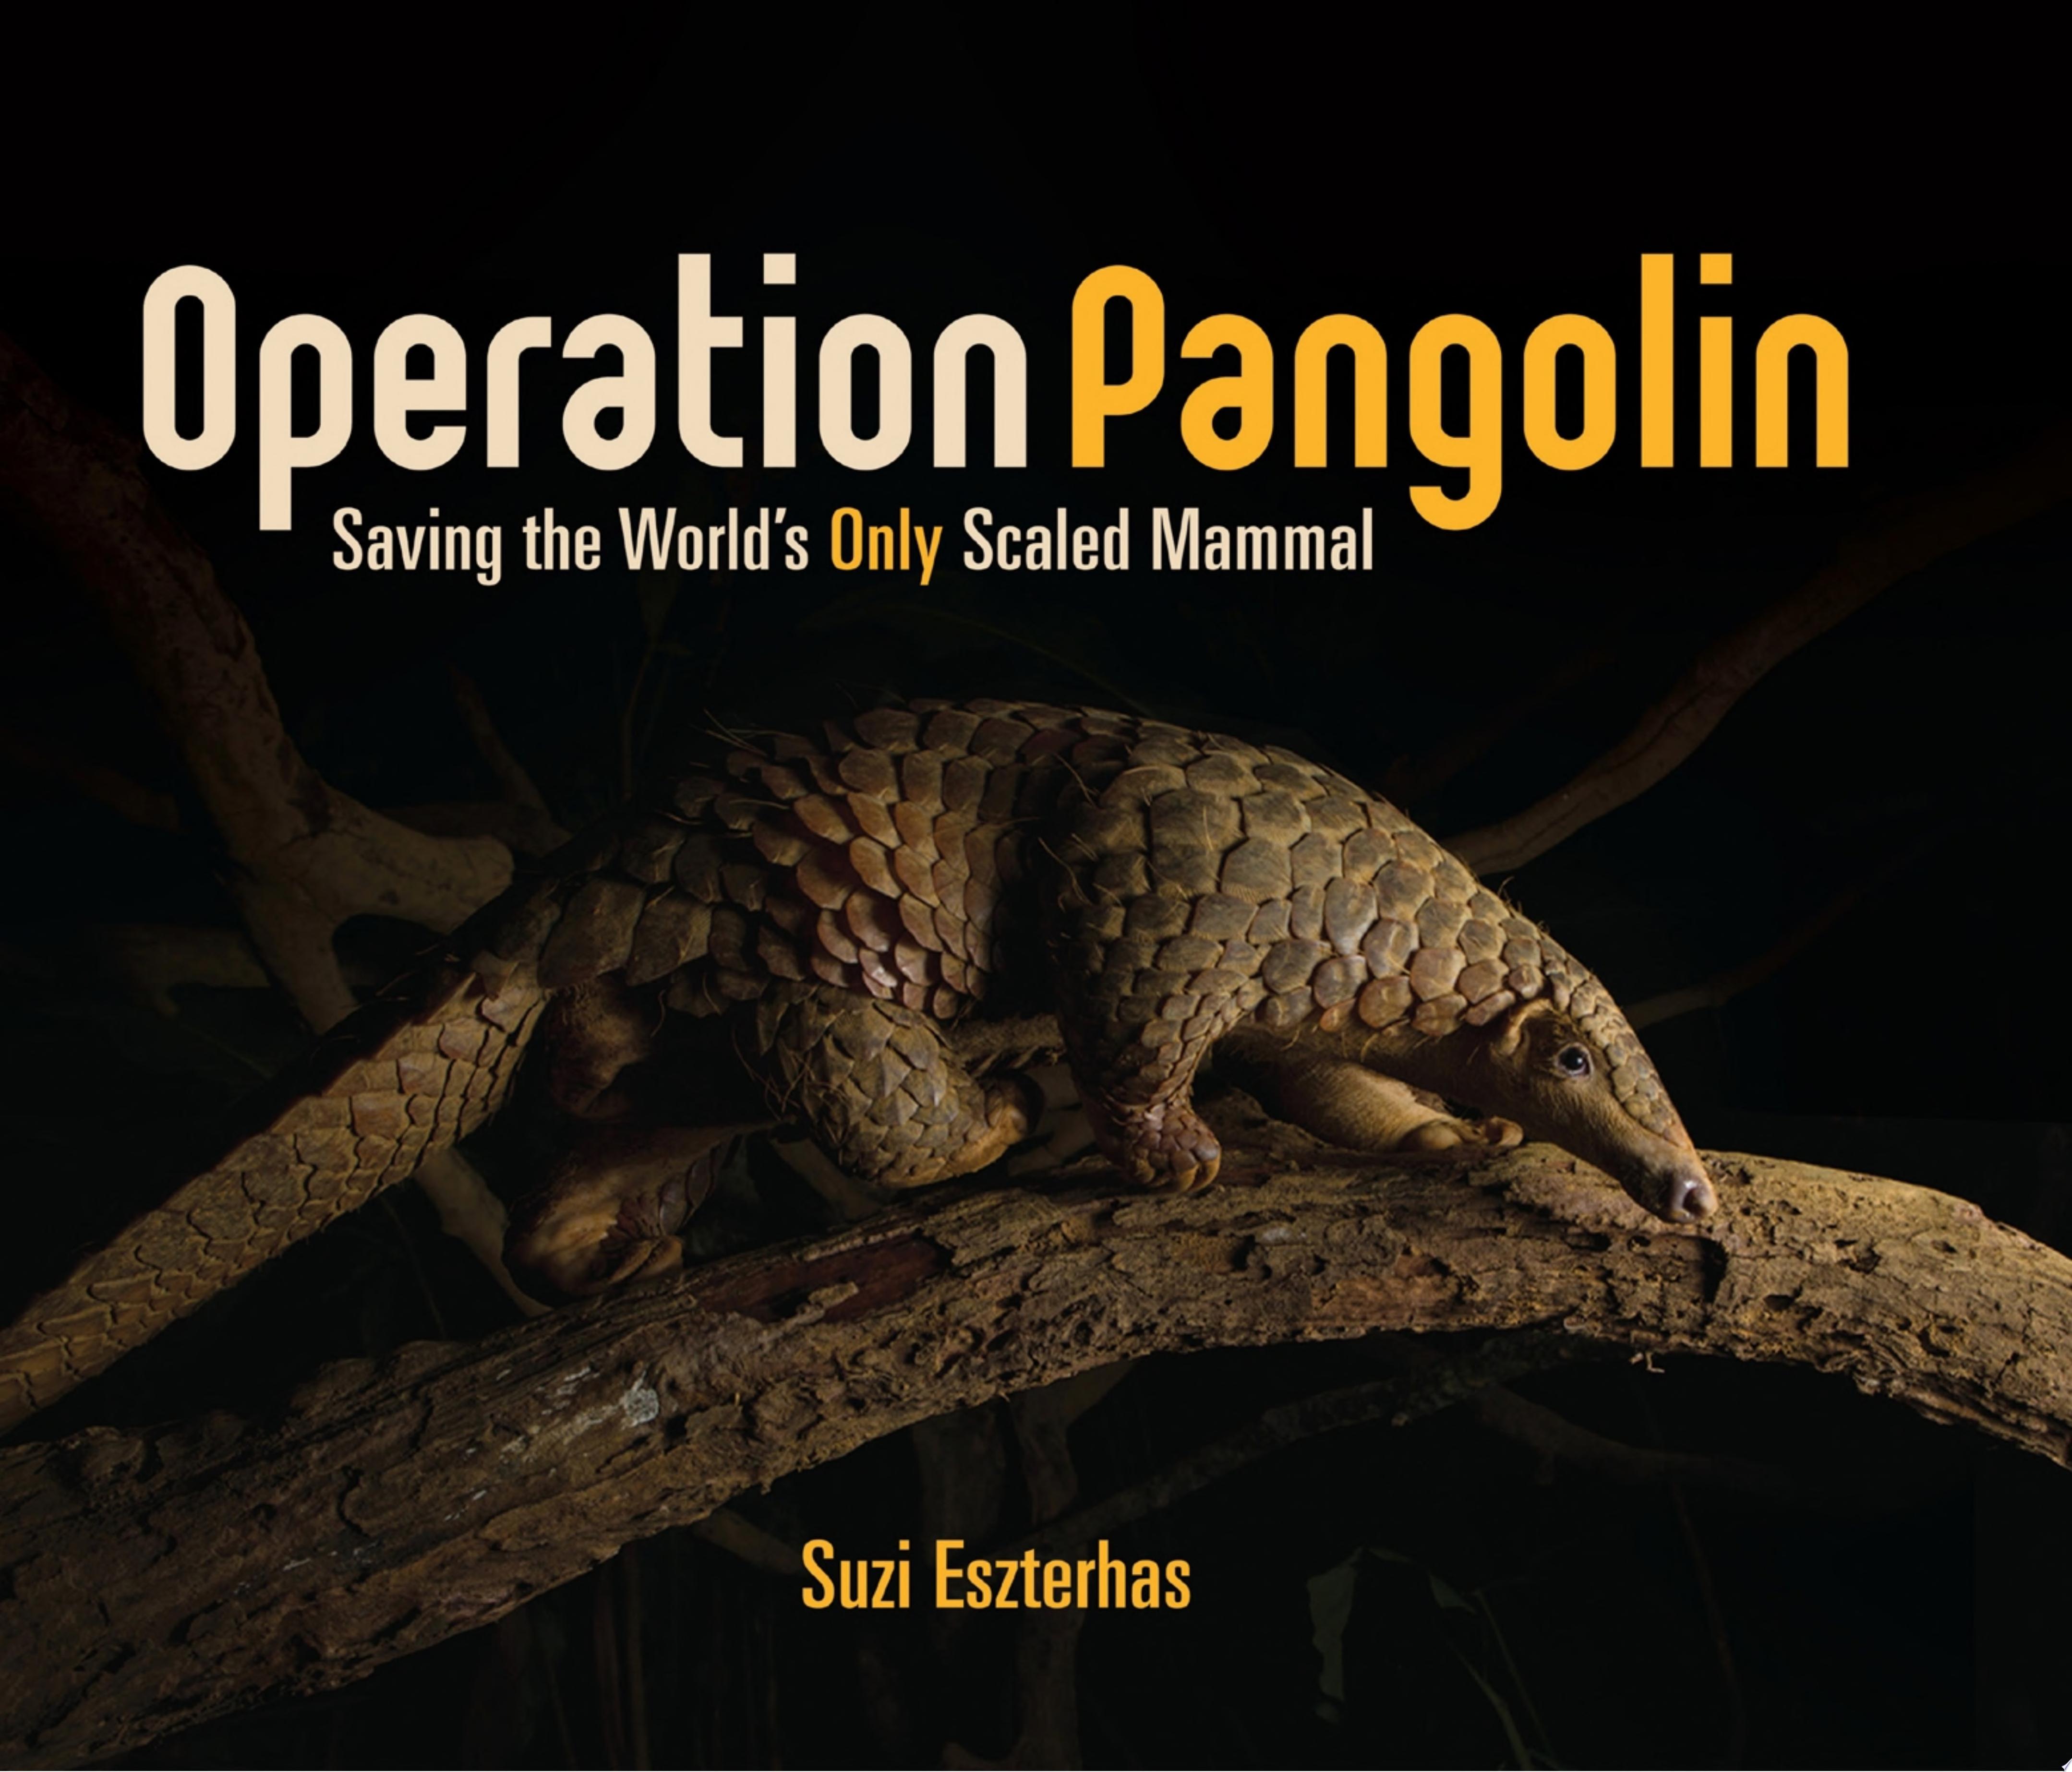 Image for "Operation Pangolin"